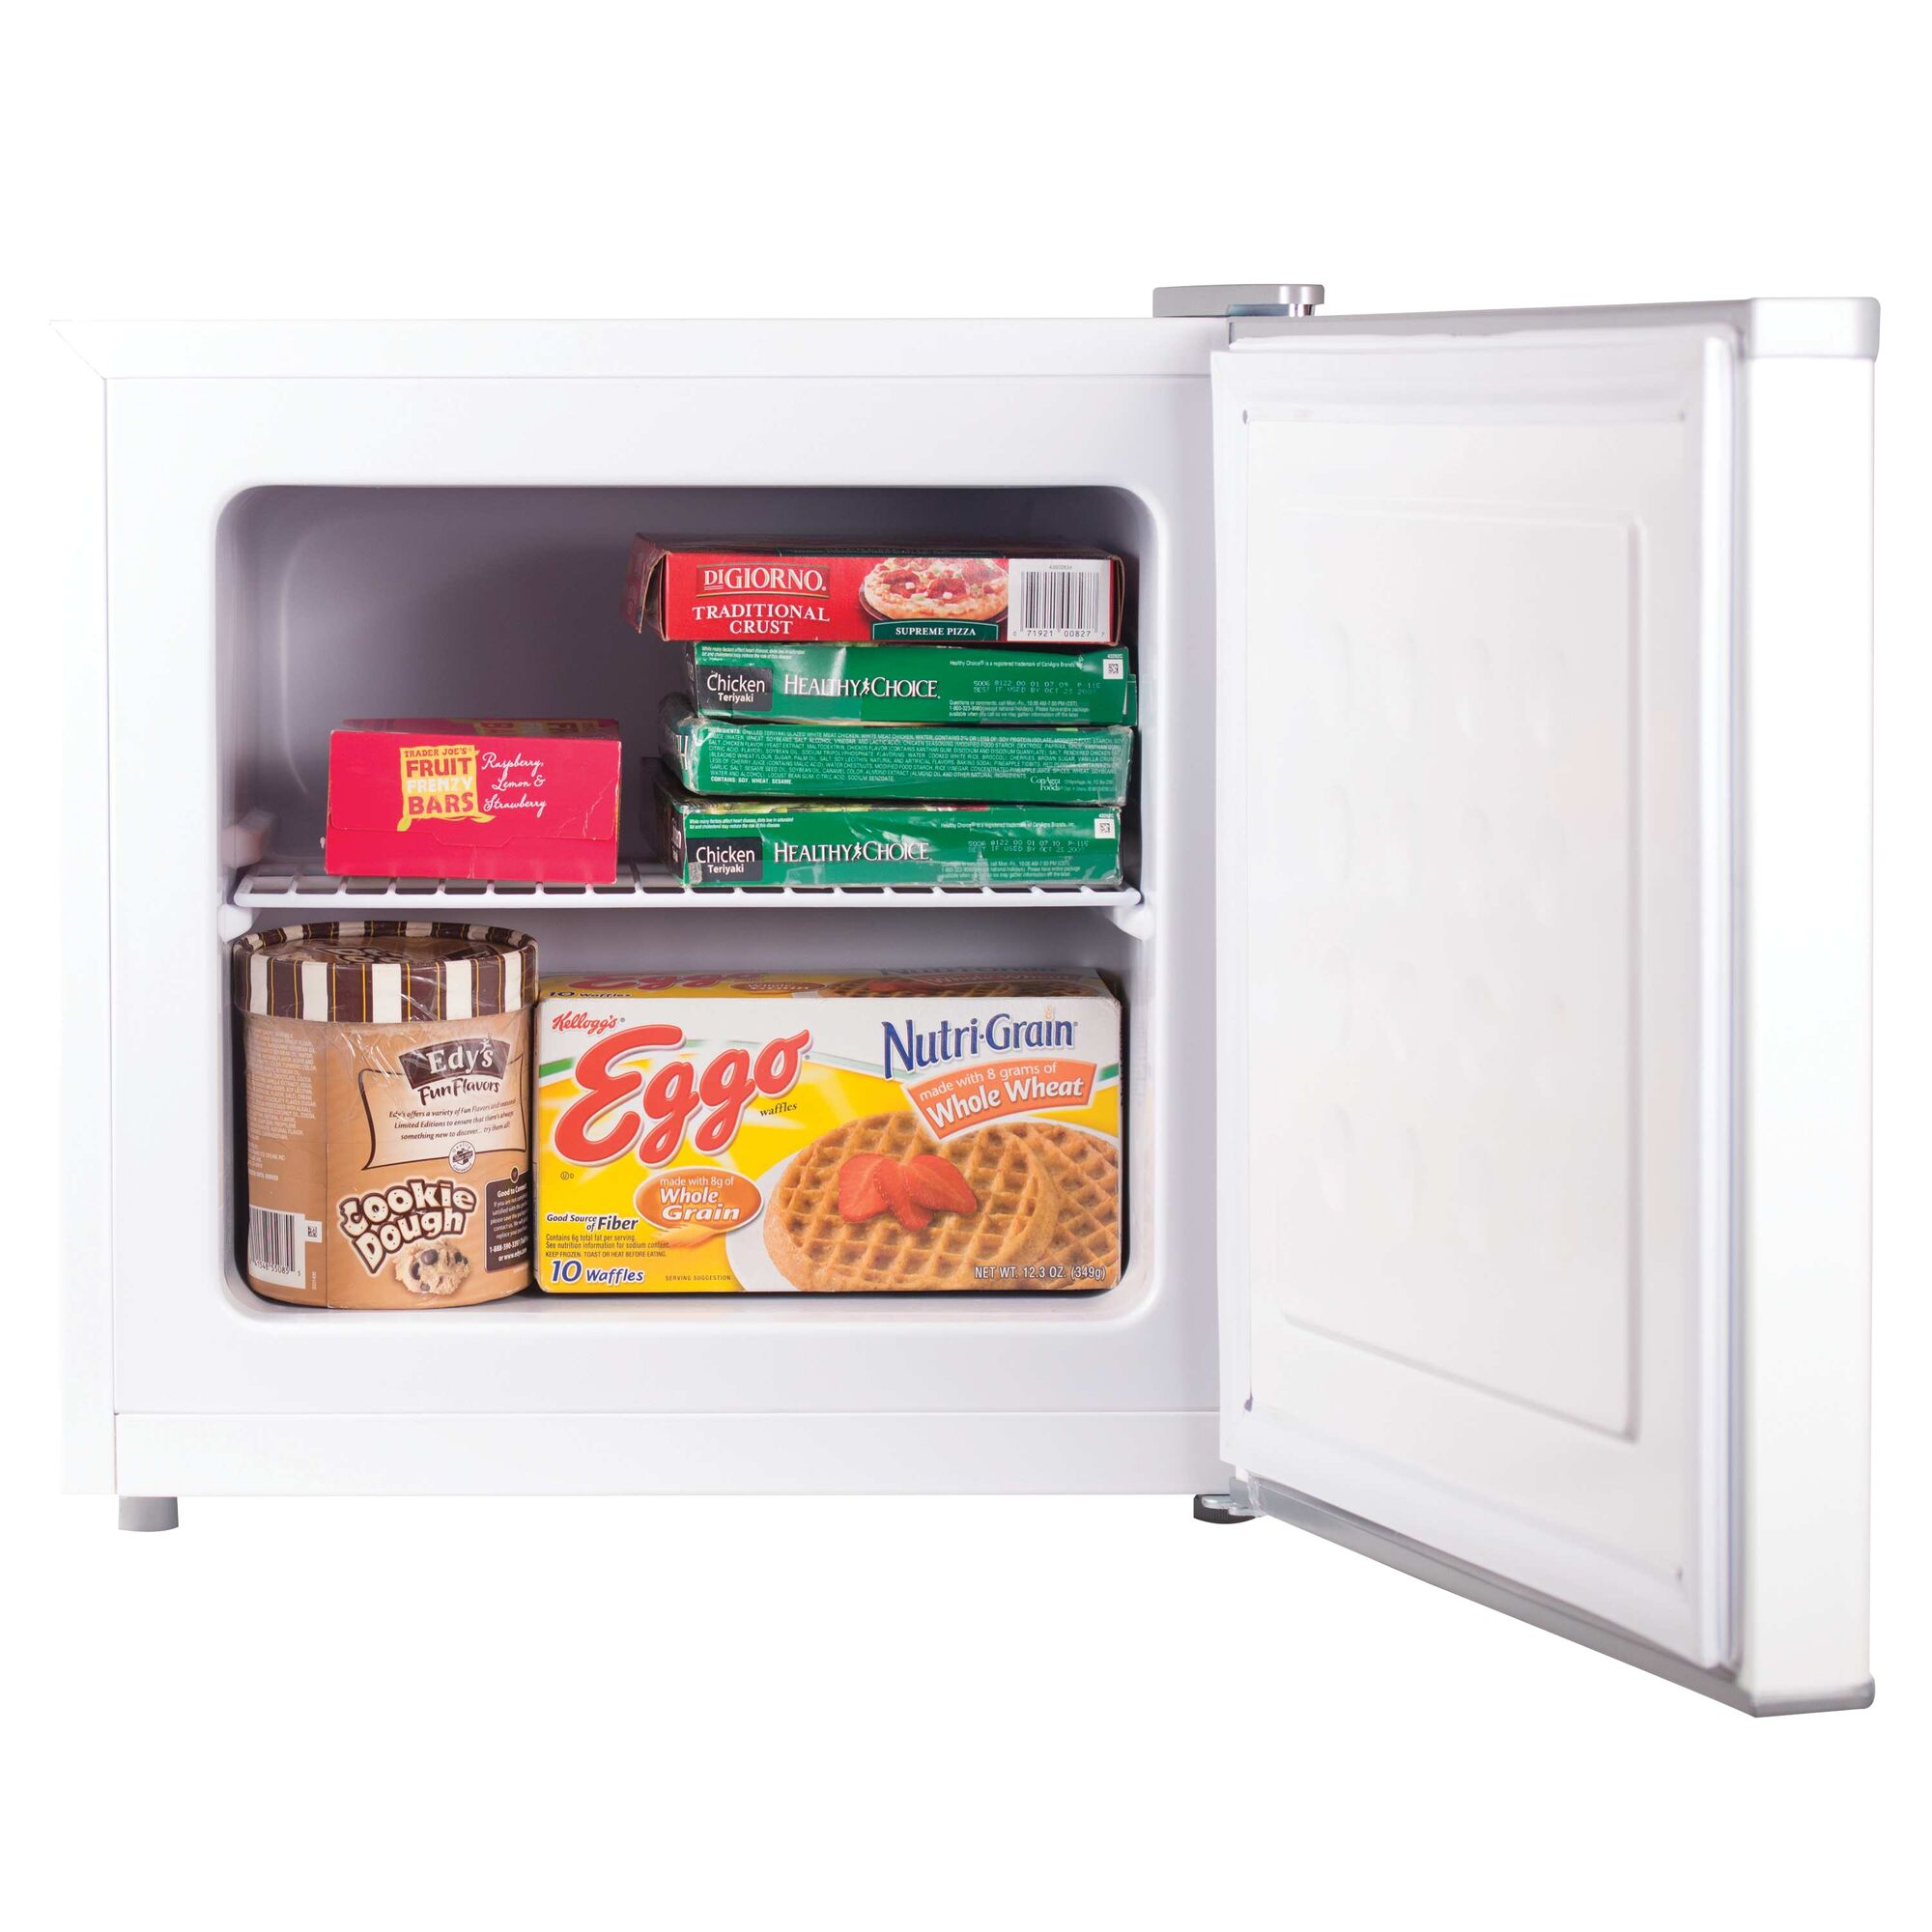 1.2 Cubic Feet Compact Upright Freezer opened.